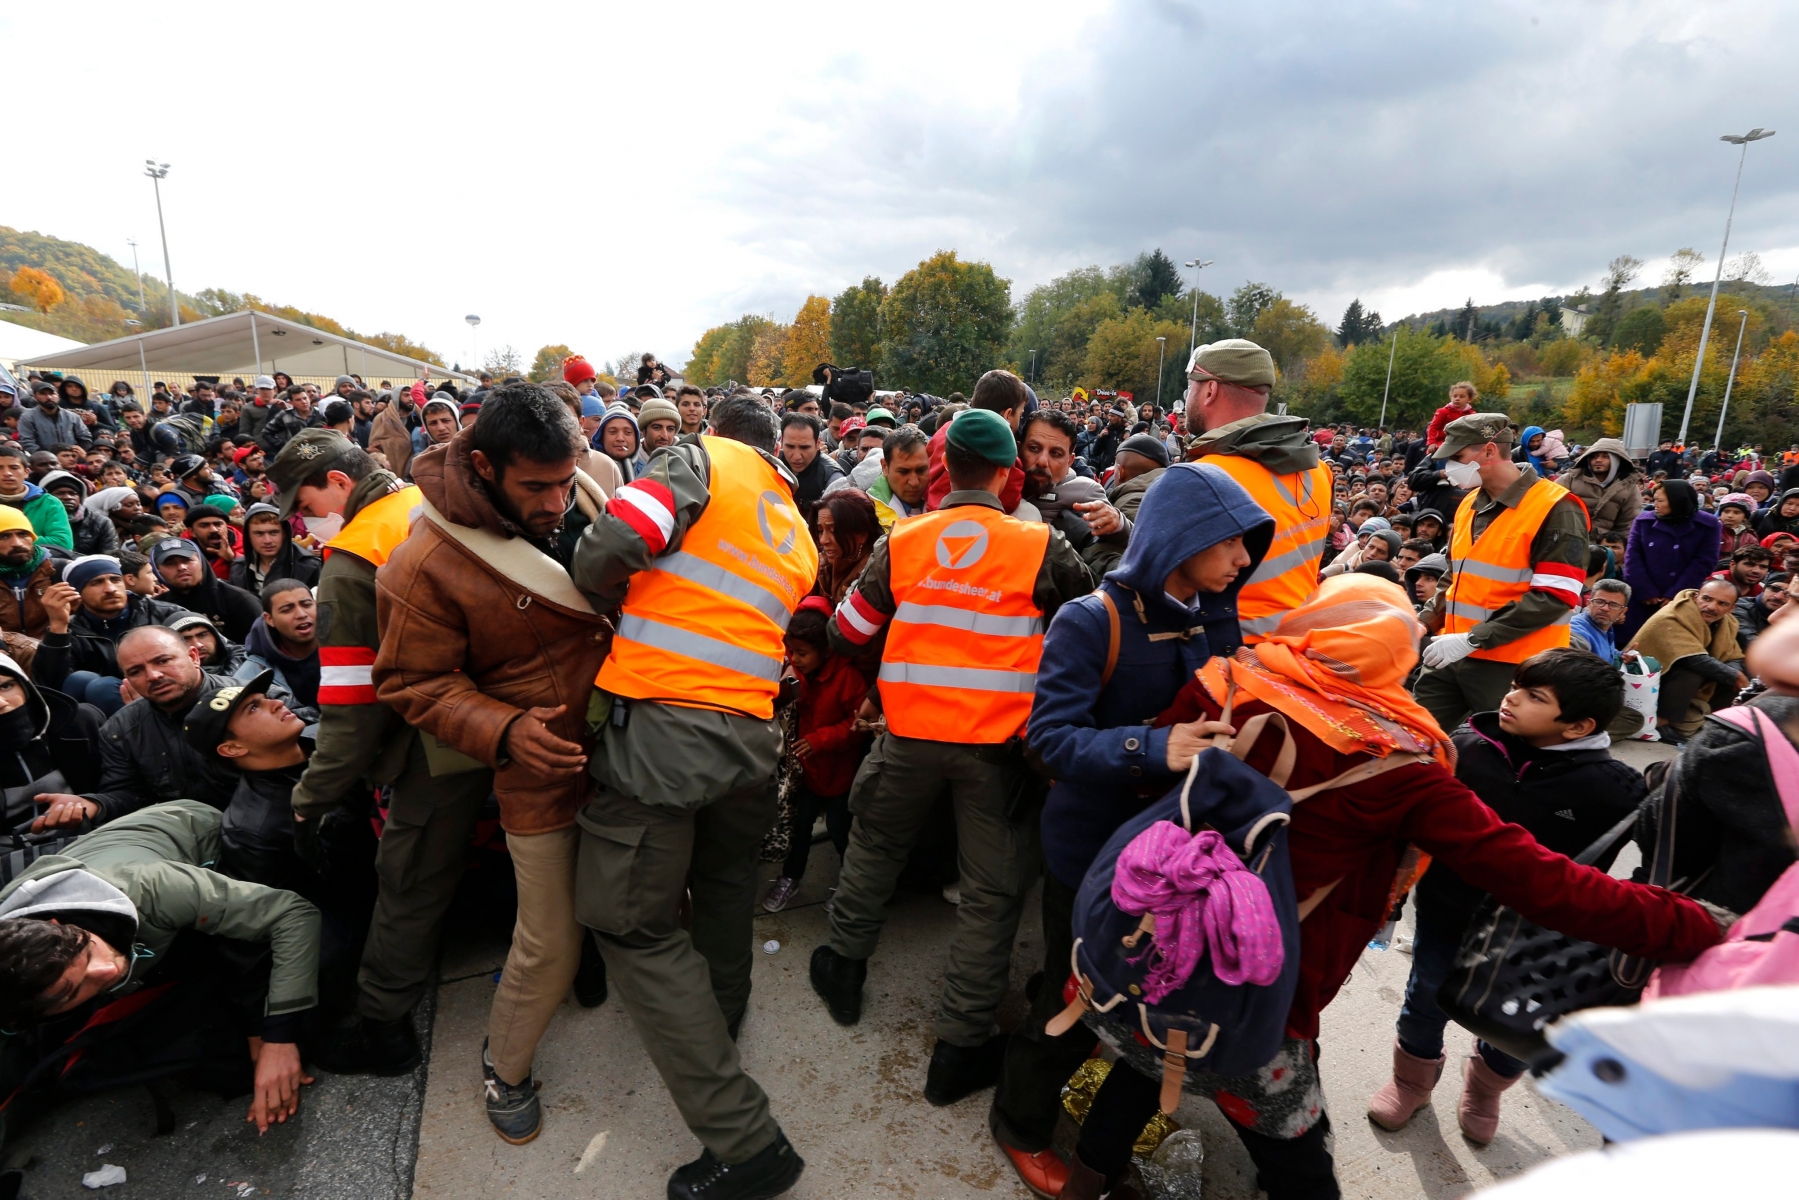 epa04989016 Austrian soldiers try and control migrants waiting to cross the border between Slovenia and Austria near Spielfield, Austria, 22 October 2015. Police had to open security fences in order to guarantee security for some 2.000 refugees waiting to enter Austria. Europe must boost security on its outer borders in the face of the brewing refugee crisis while finding a way to stay true to its values, delegates at a meeting of European conservative parties argued 21 October 2015.  EPA/ANTONIO BAT AUSTRIA  REFUGEES MIGRATION CRISIS